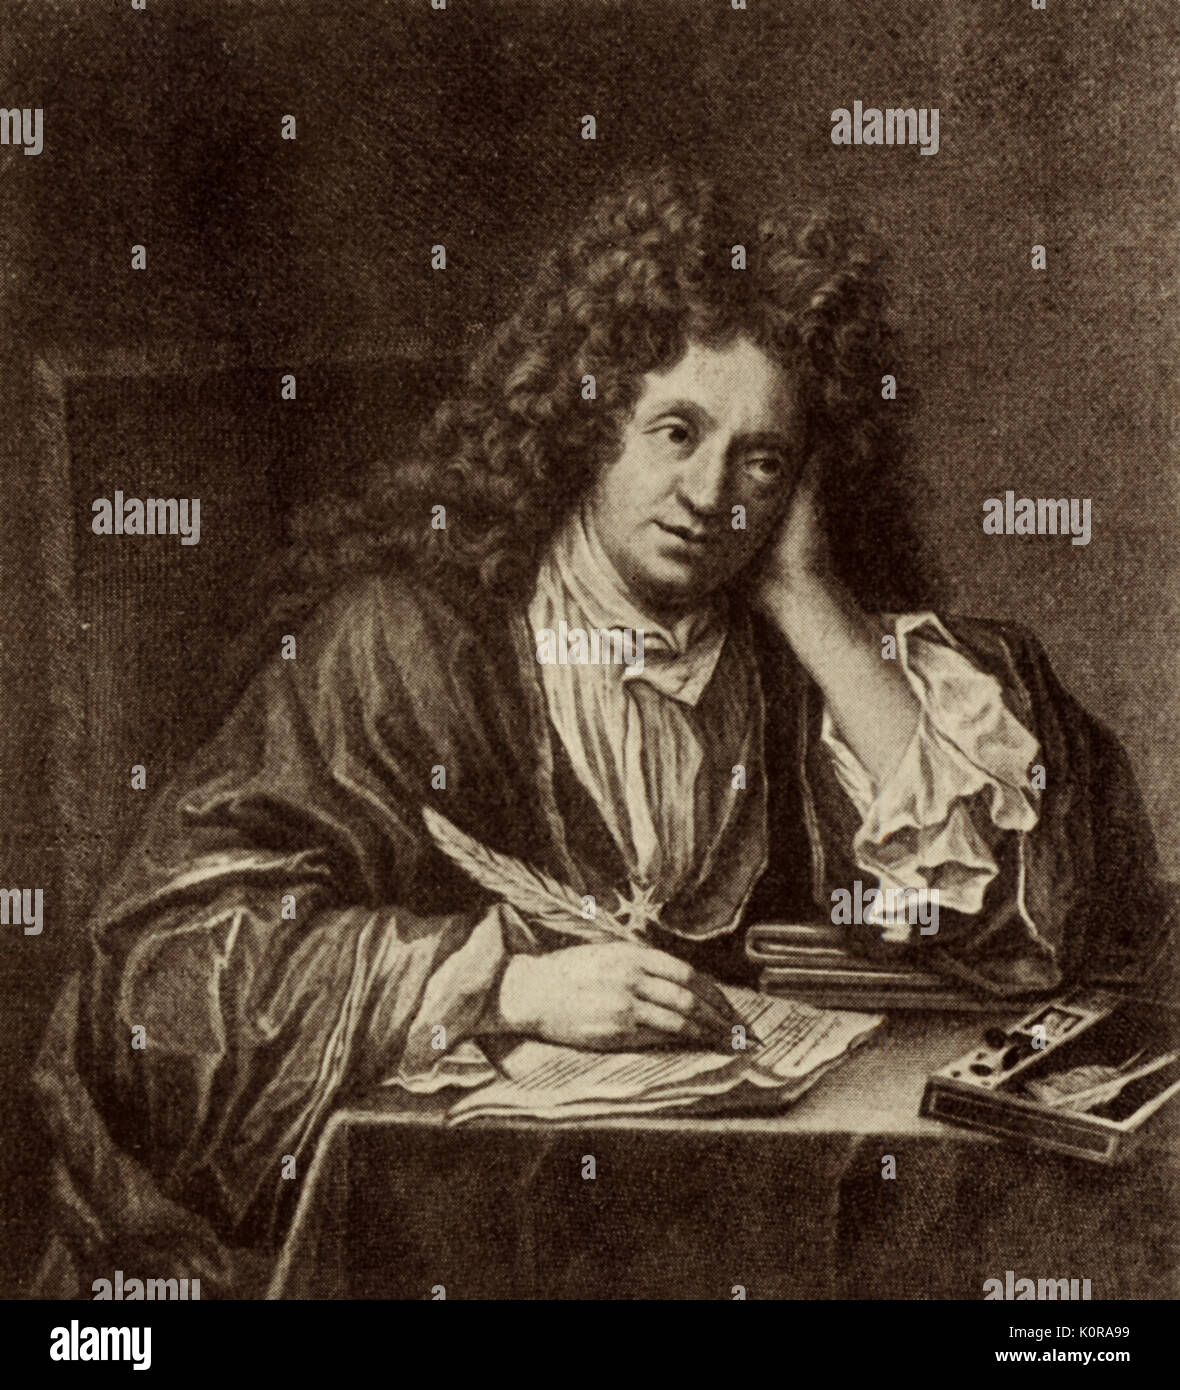 Michel Richard de LALANDE (Delalande) writing with quill. French organist composer, 15 December 1657 -18 June 1726. Court Director of Music Stock Photo